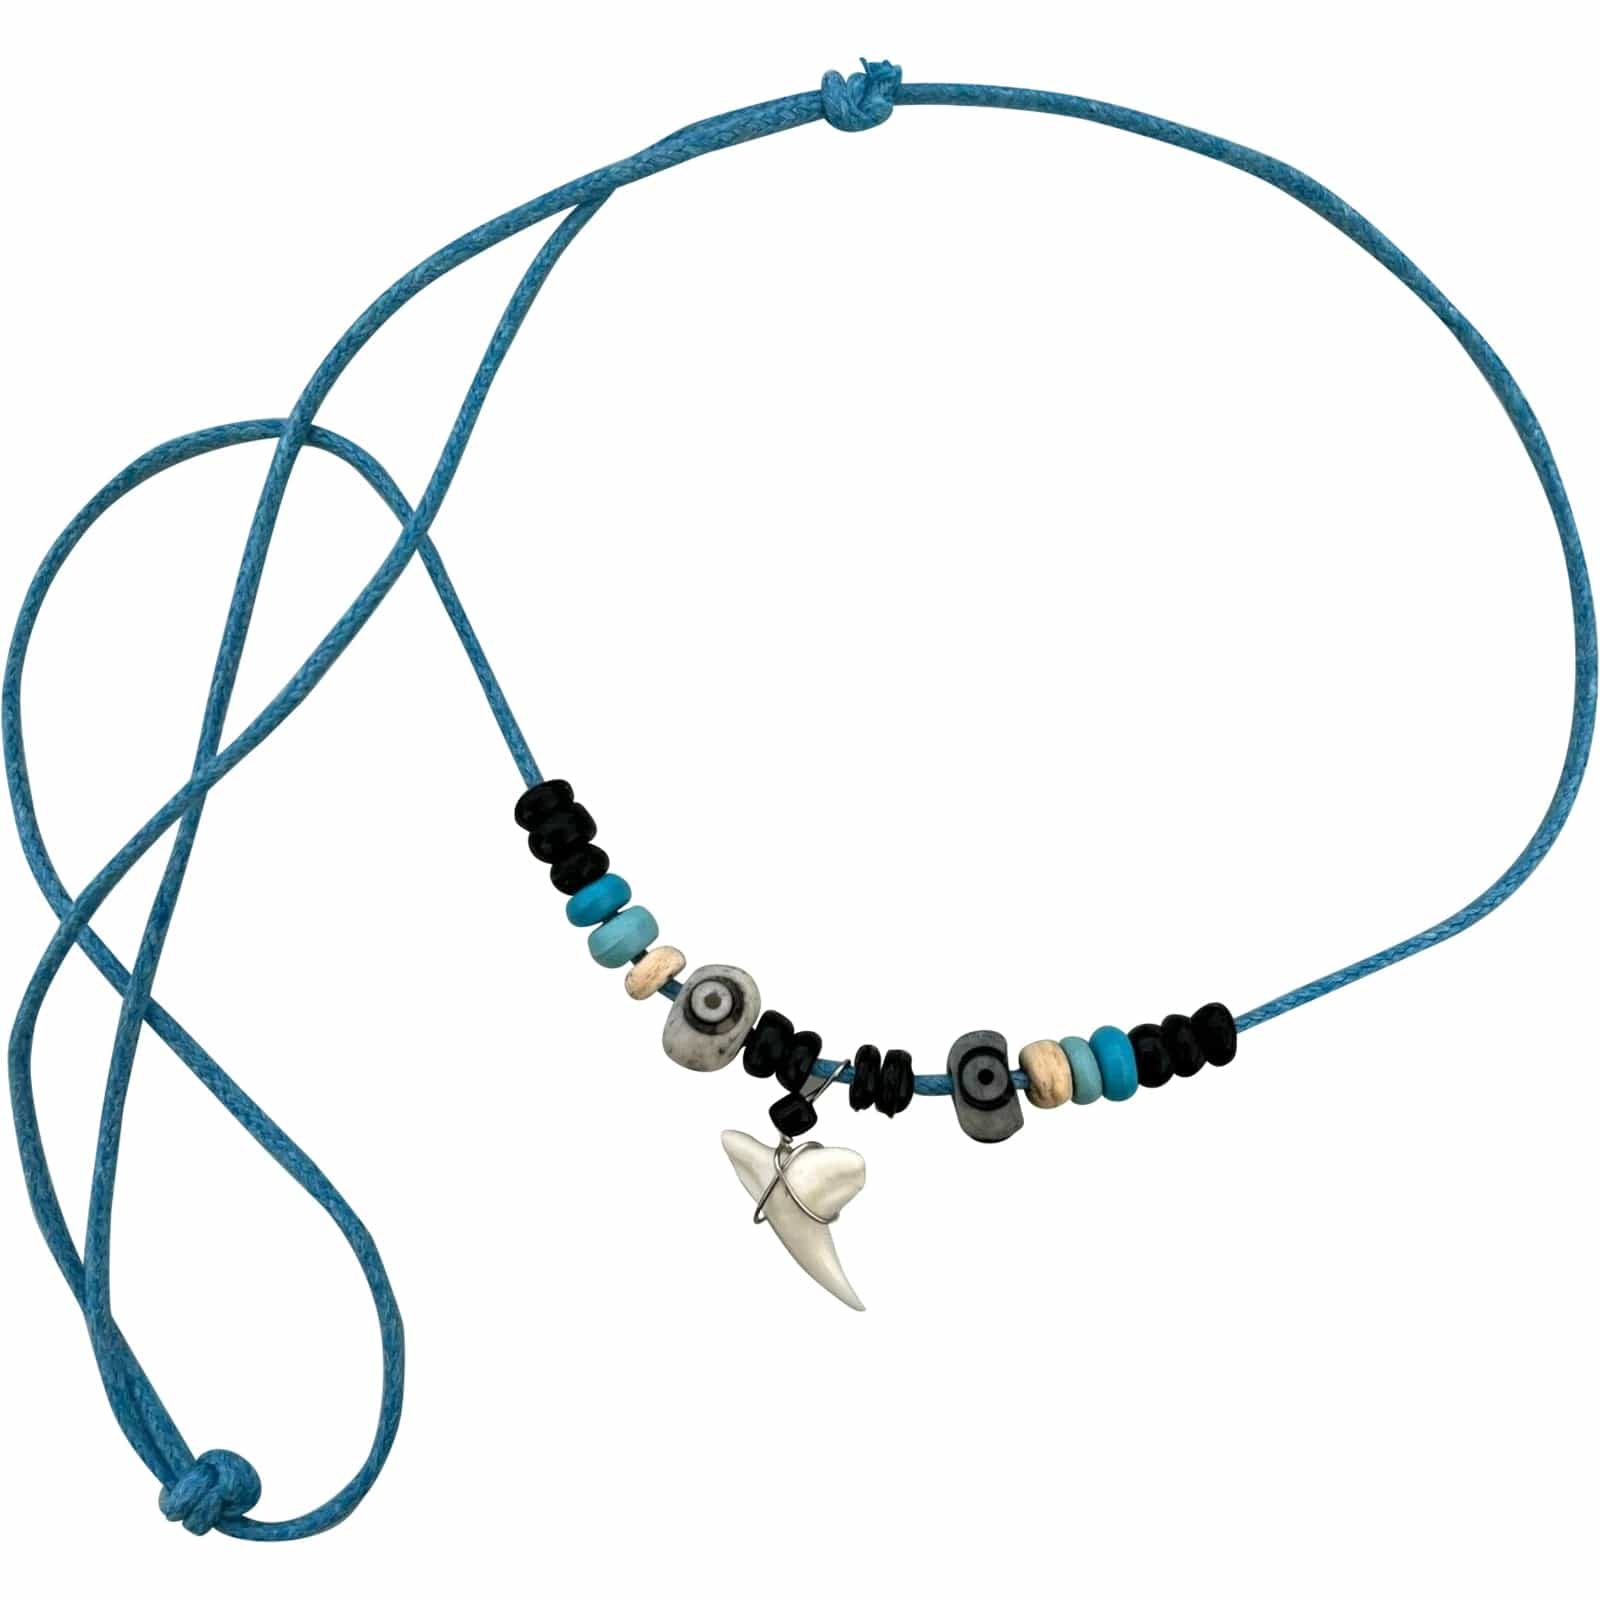 Imitation Resin Shark Tooth Pendant Blue Turquoise Cord Chain Wood Beads Surf Necklace Jewellery